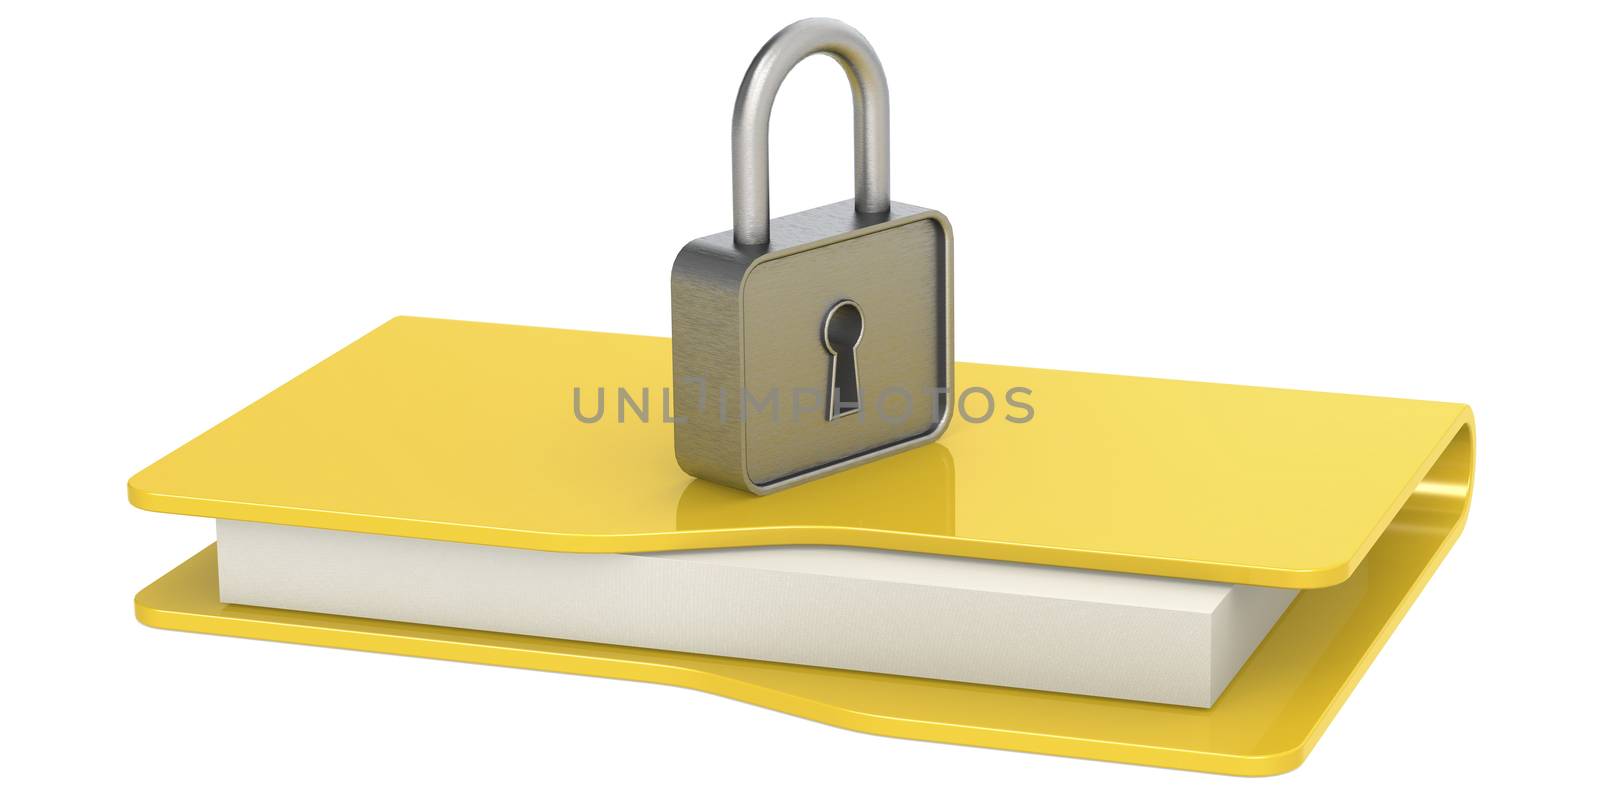 Yellow folder with padlock. Data security concept, 3D rendering